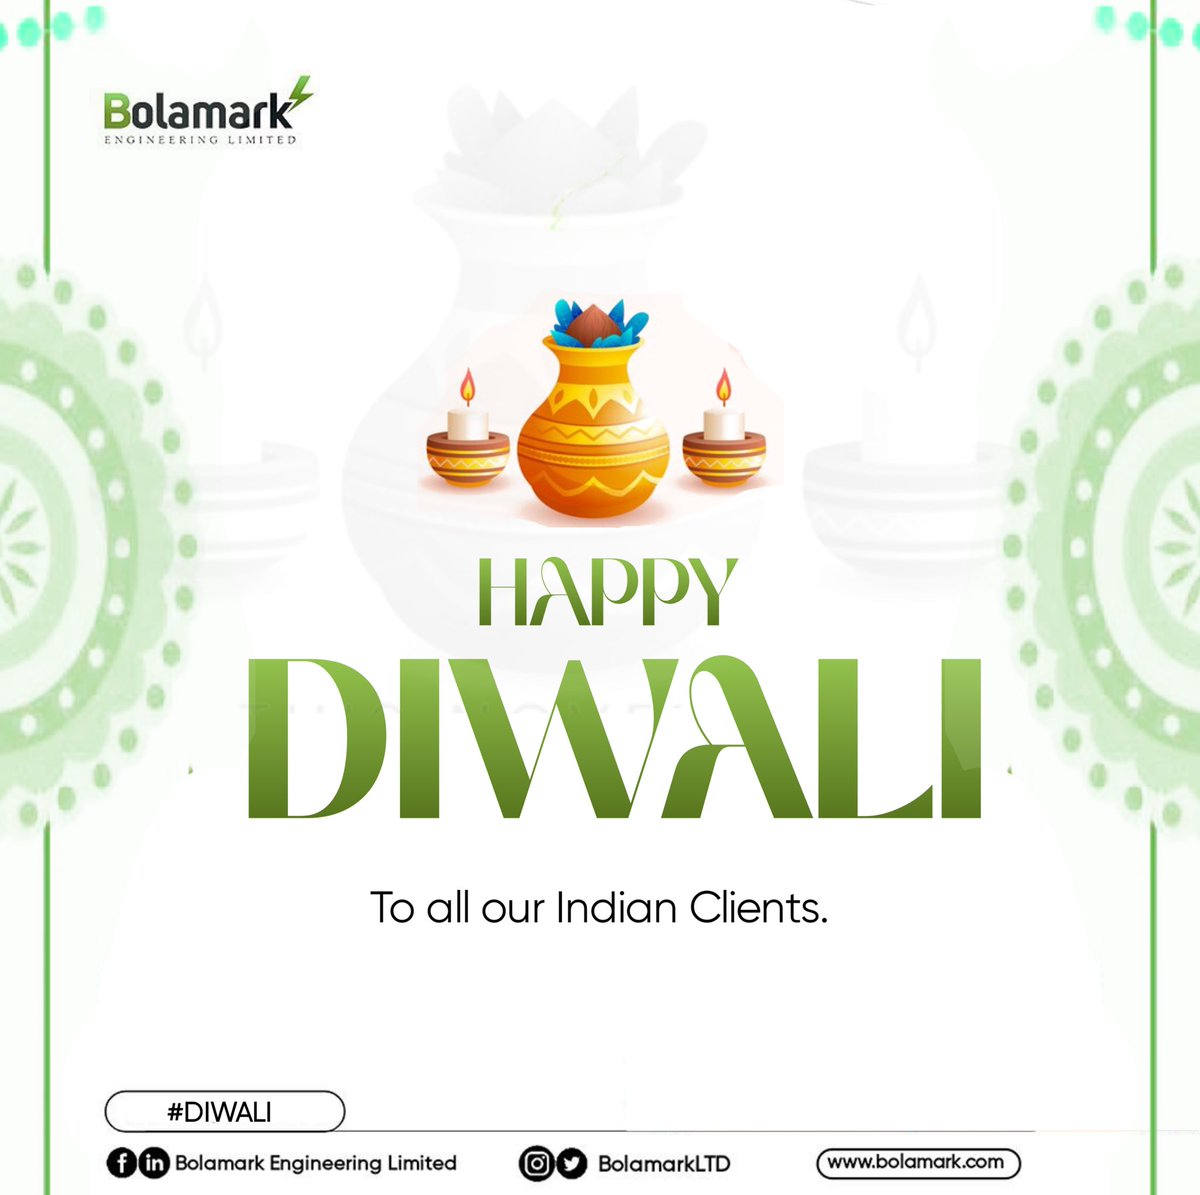 Diwali is a time to create beautiful memories with loved ones. May this festival bring joy, laughter, and togetherness to our family. 
Happy Diwali!
#happydiwali #happyfestival #diwali #happydiwalifestival #festivecelebration